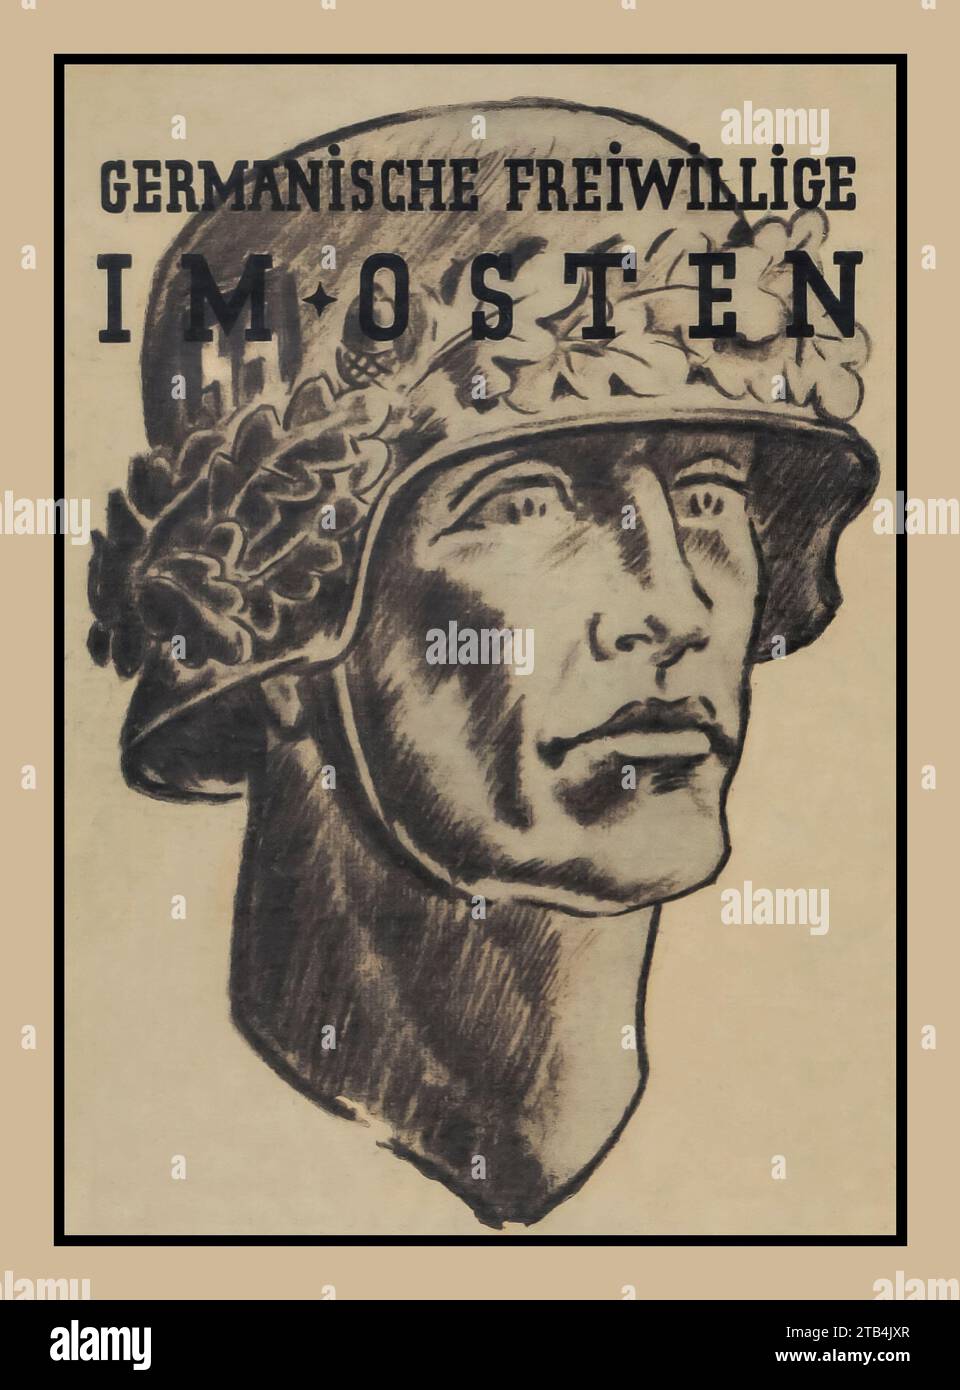 Nazi Propaganda Recruiting Poster 1940s WW2 Illustrating a Waffen SS soldier with his helmet wreathed in oak leaves. Caption reads 'GERMANIC VOLUNTEERS IN THE EAST' (germanische freiwillige IM OSTEN) poster promotional card Stock Photo